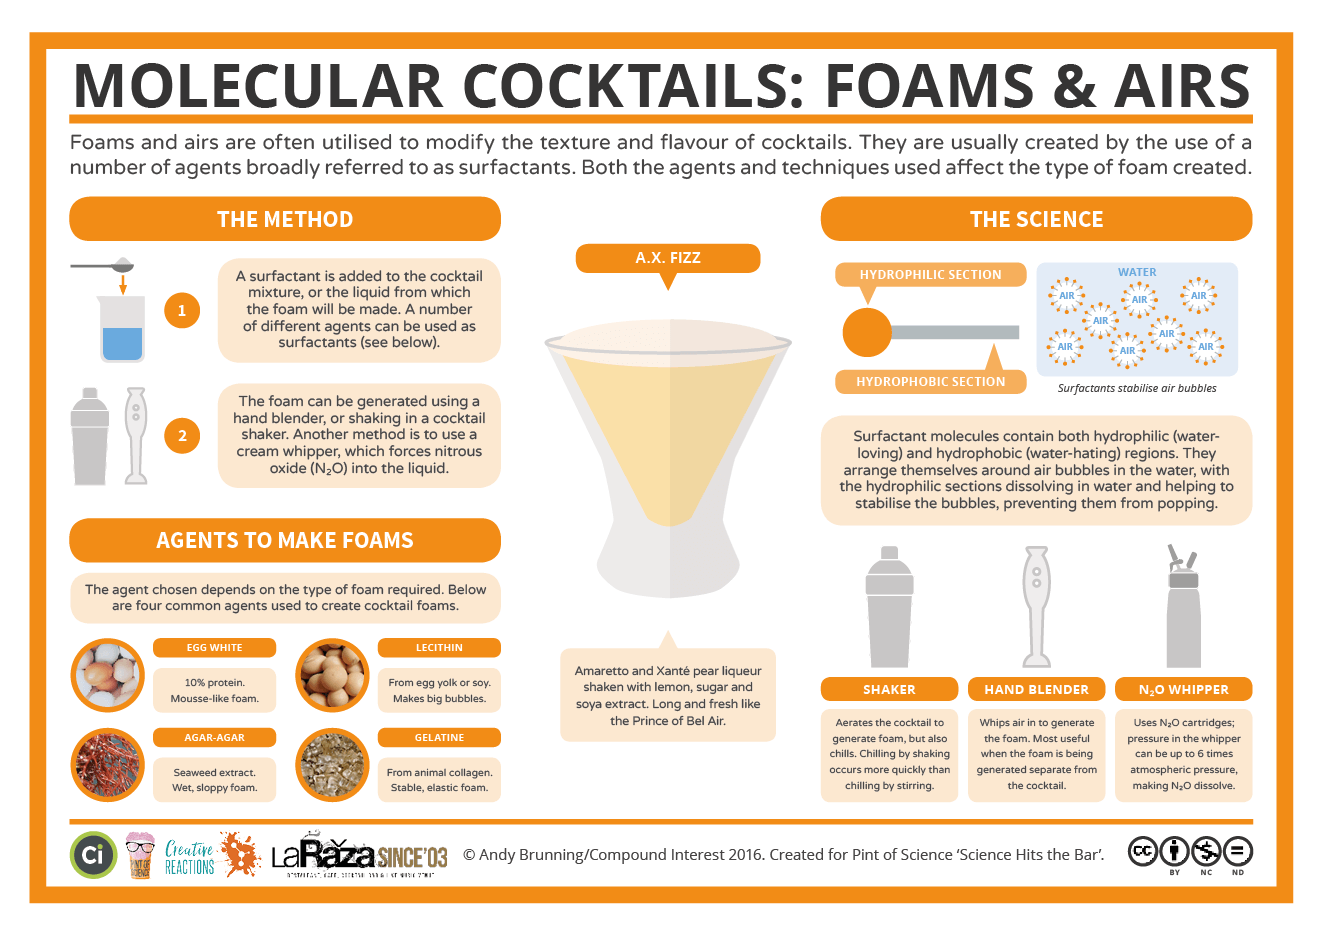 III. Pros and Cons of Shaking Cocktails